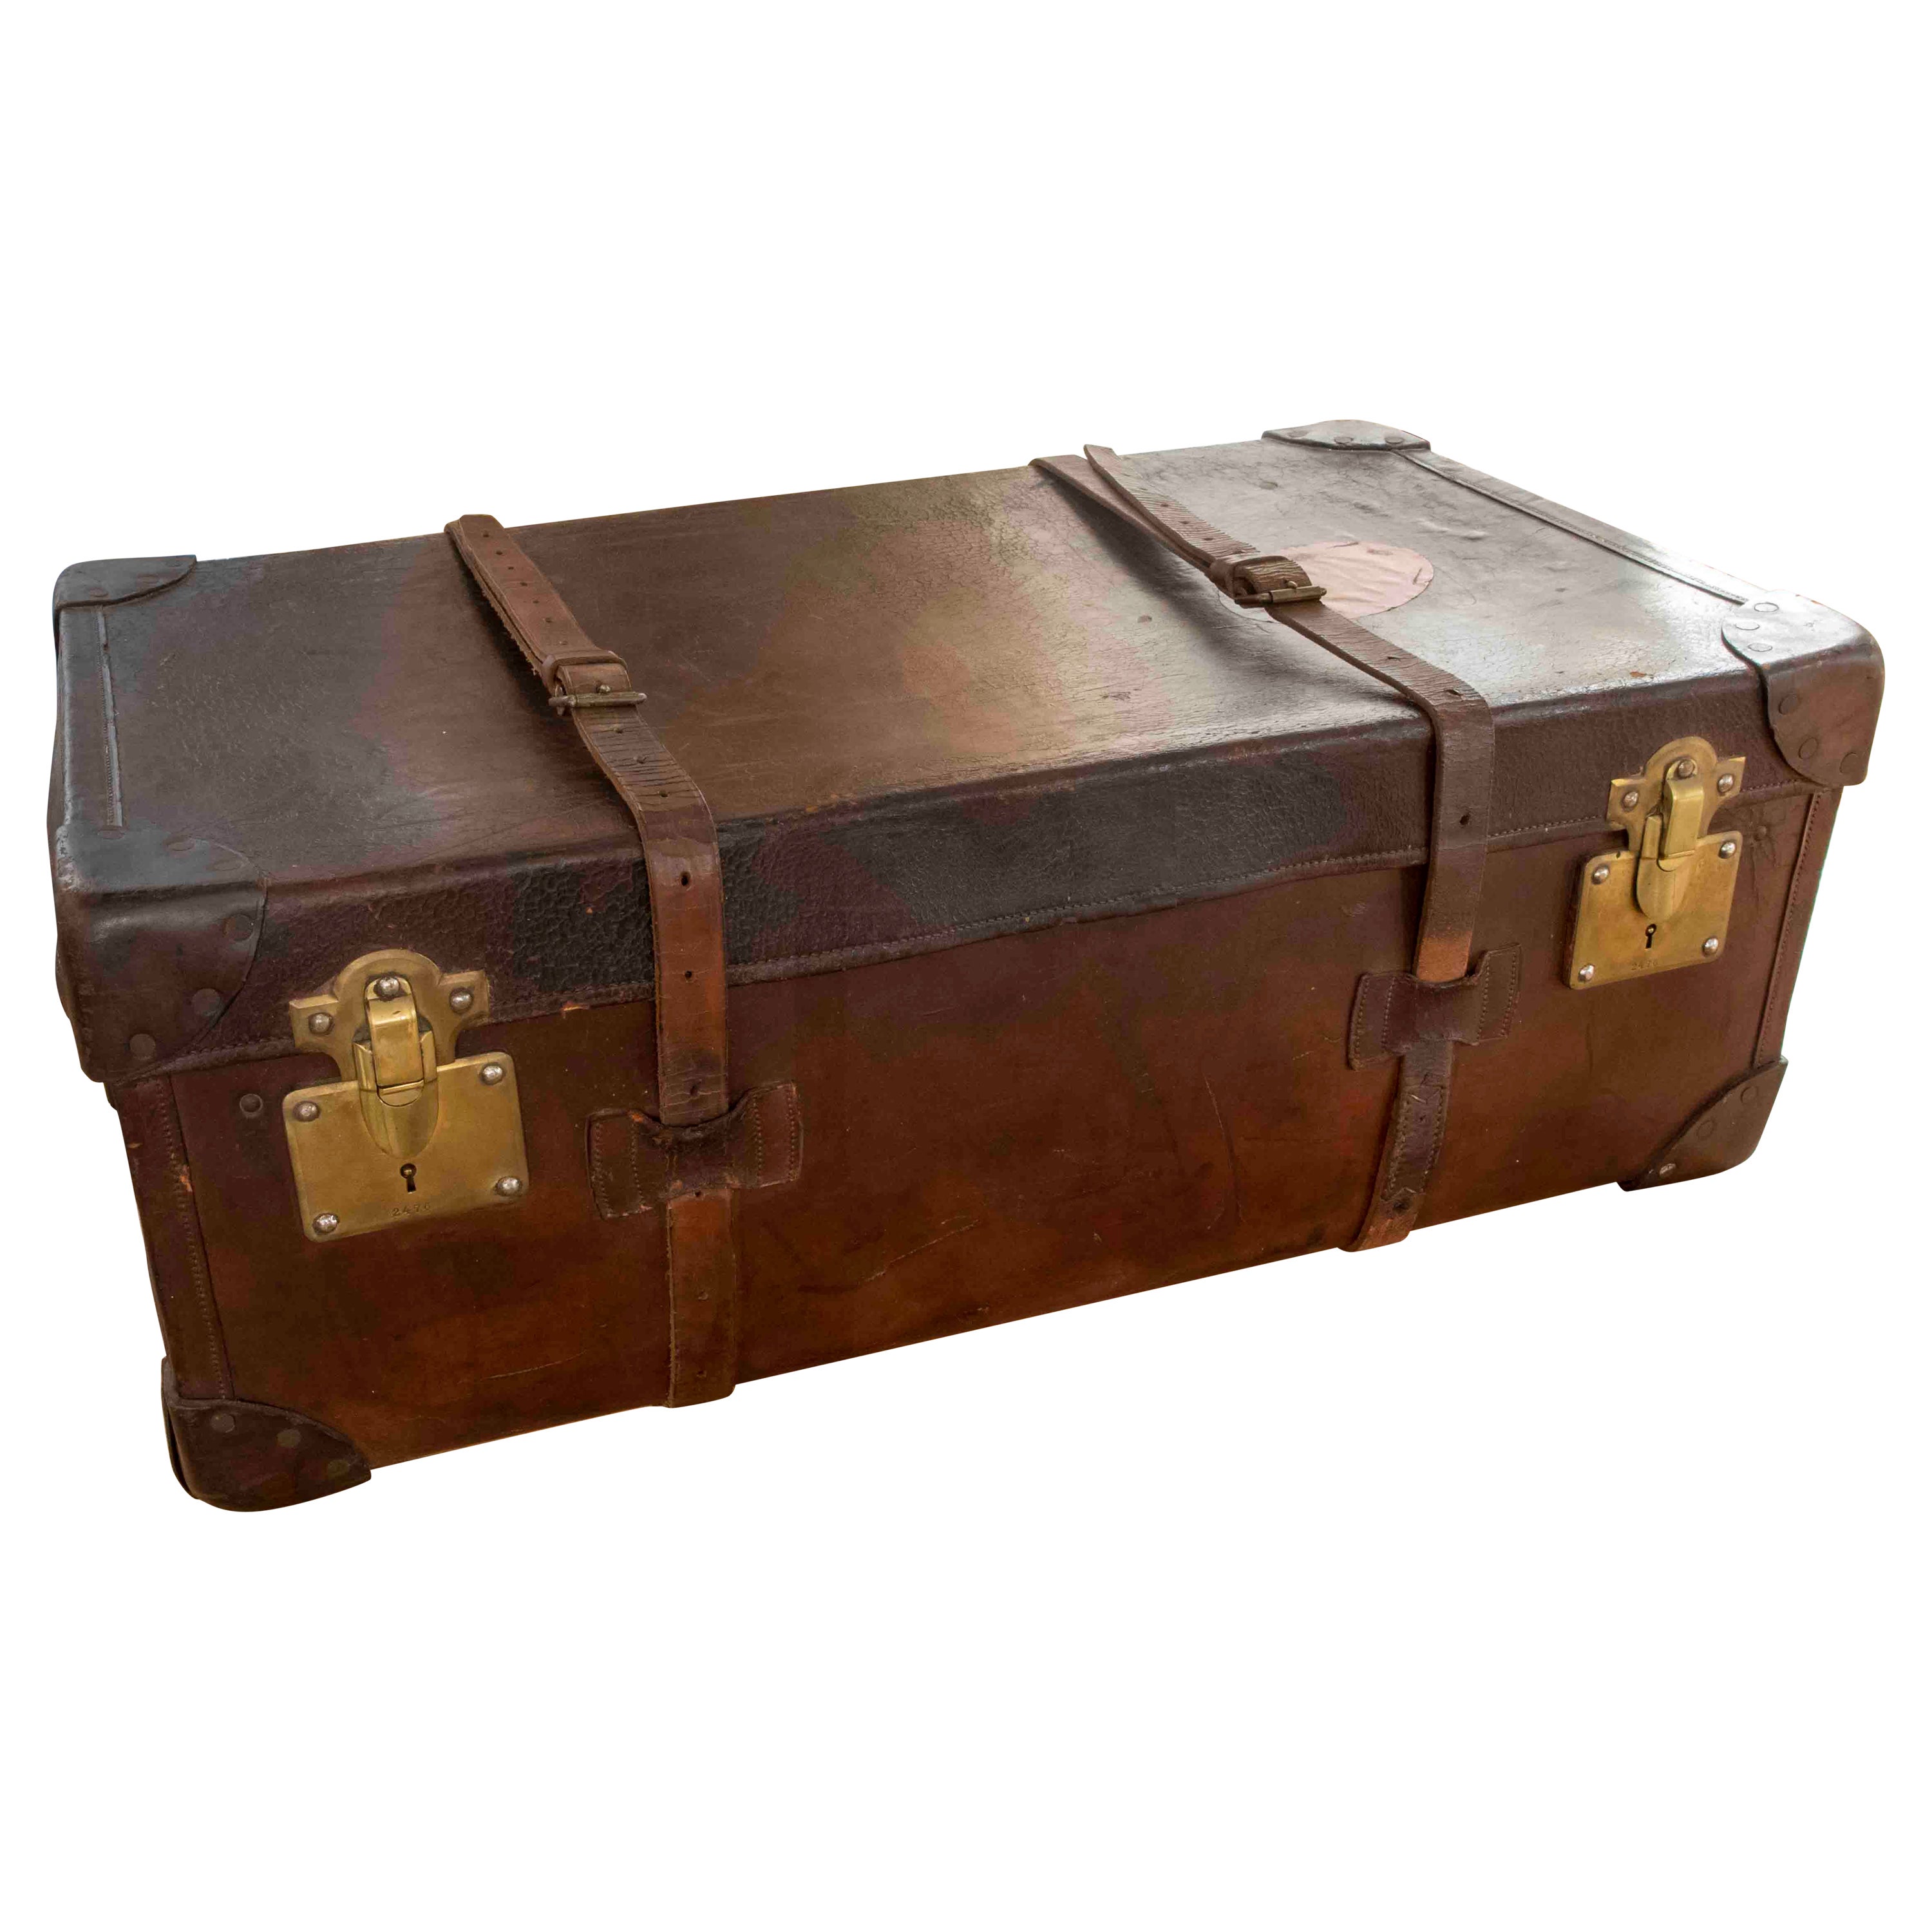 1950s Leather and Wooden Travel Suitcase